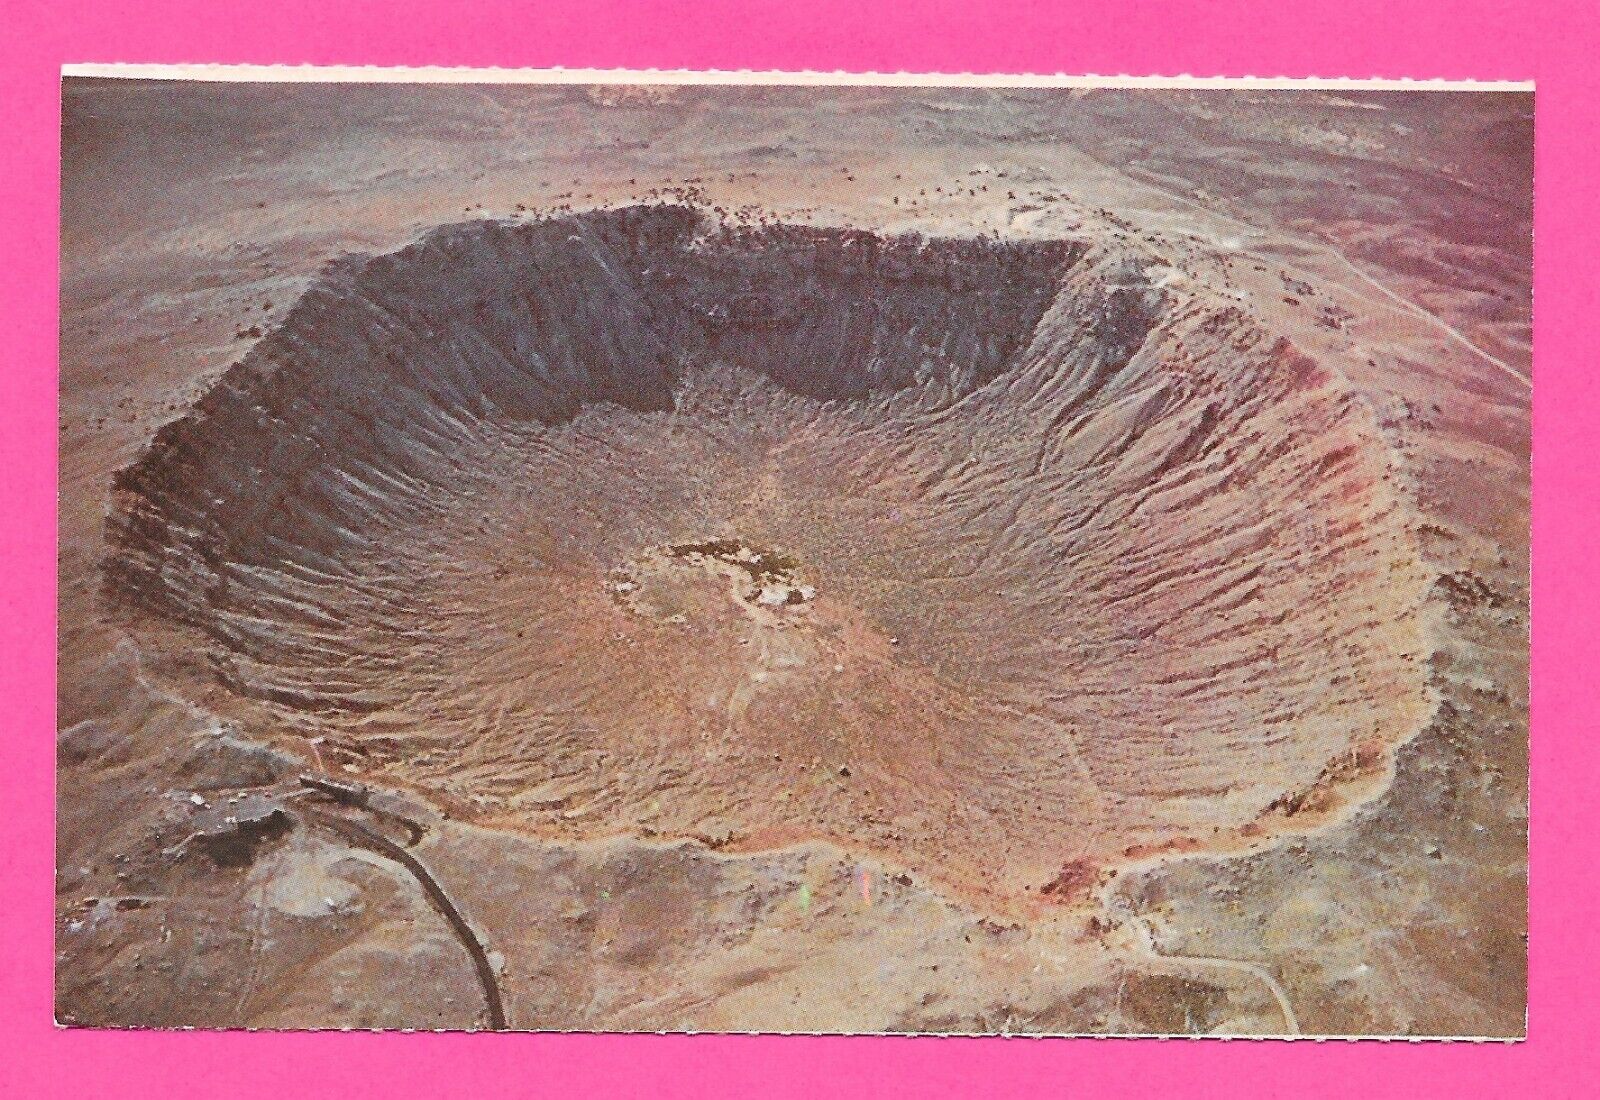 The Great Meteor Crater of Arizona - Aerial View Post Card